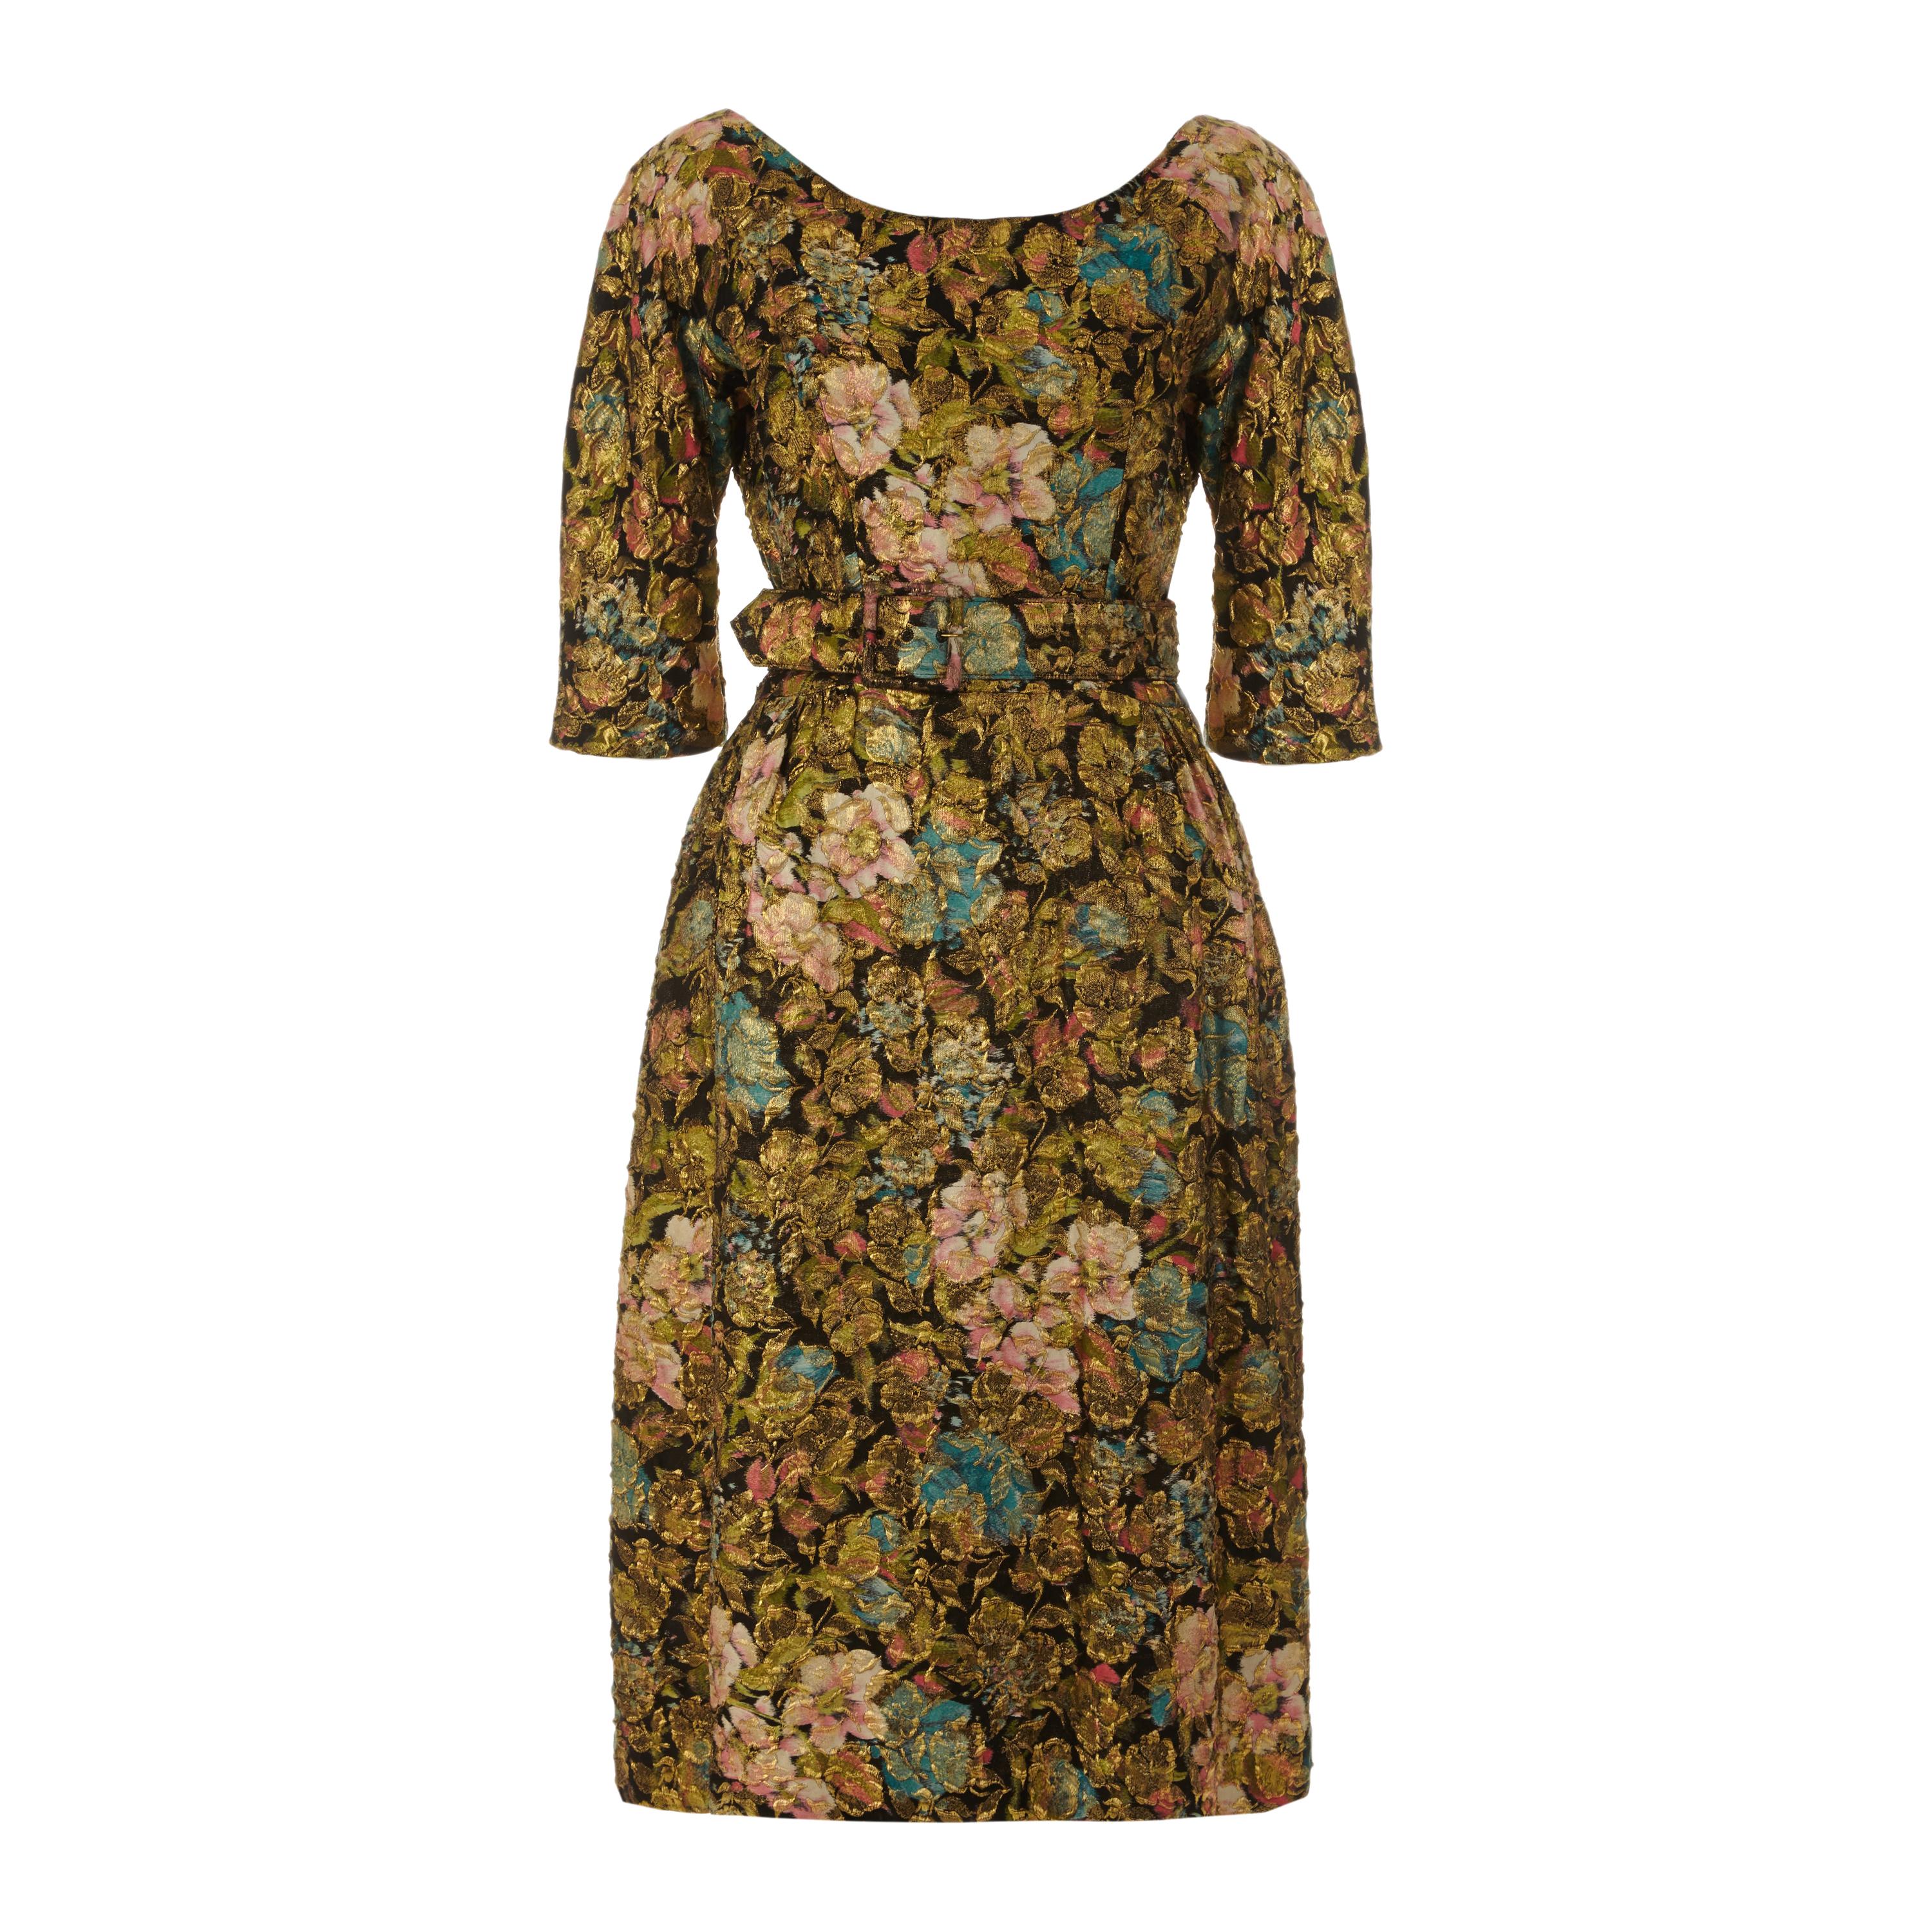 1950s Suzy Perette Floral Gold Lame Dress at 1stDibs